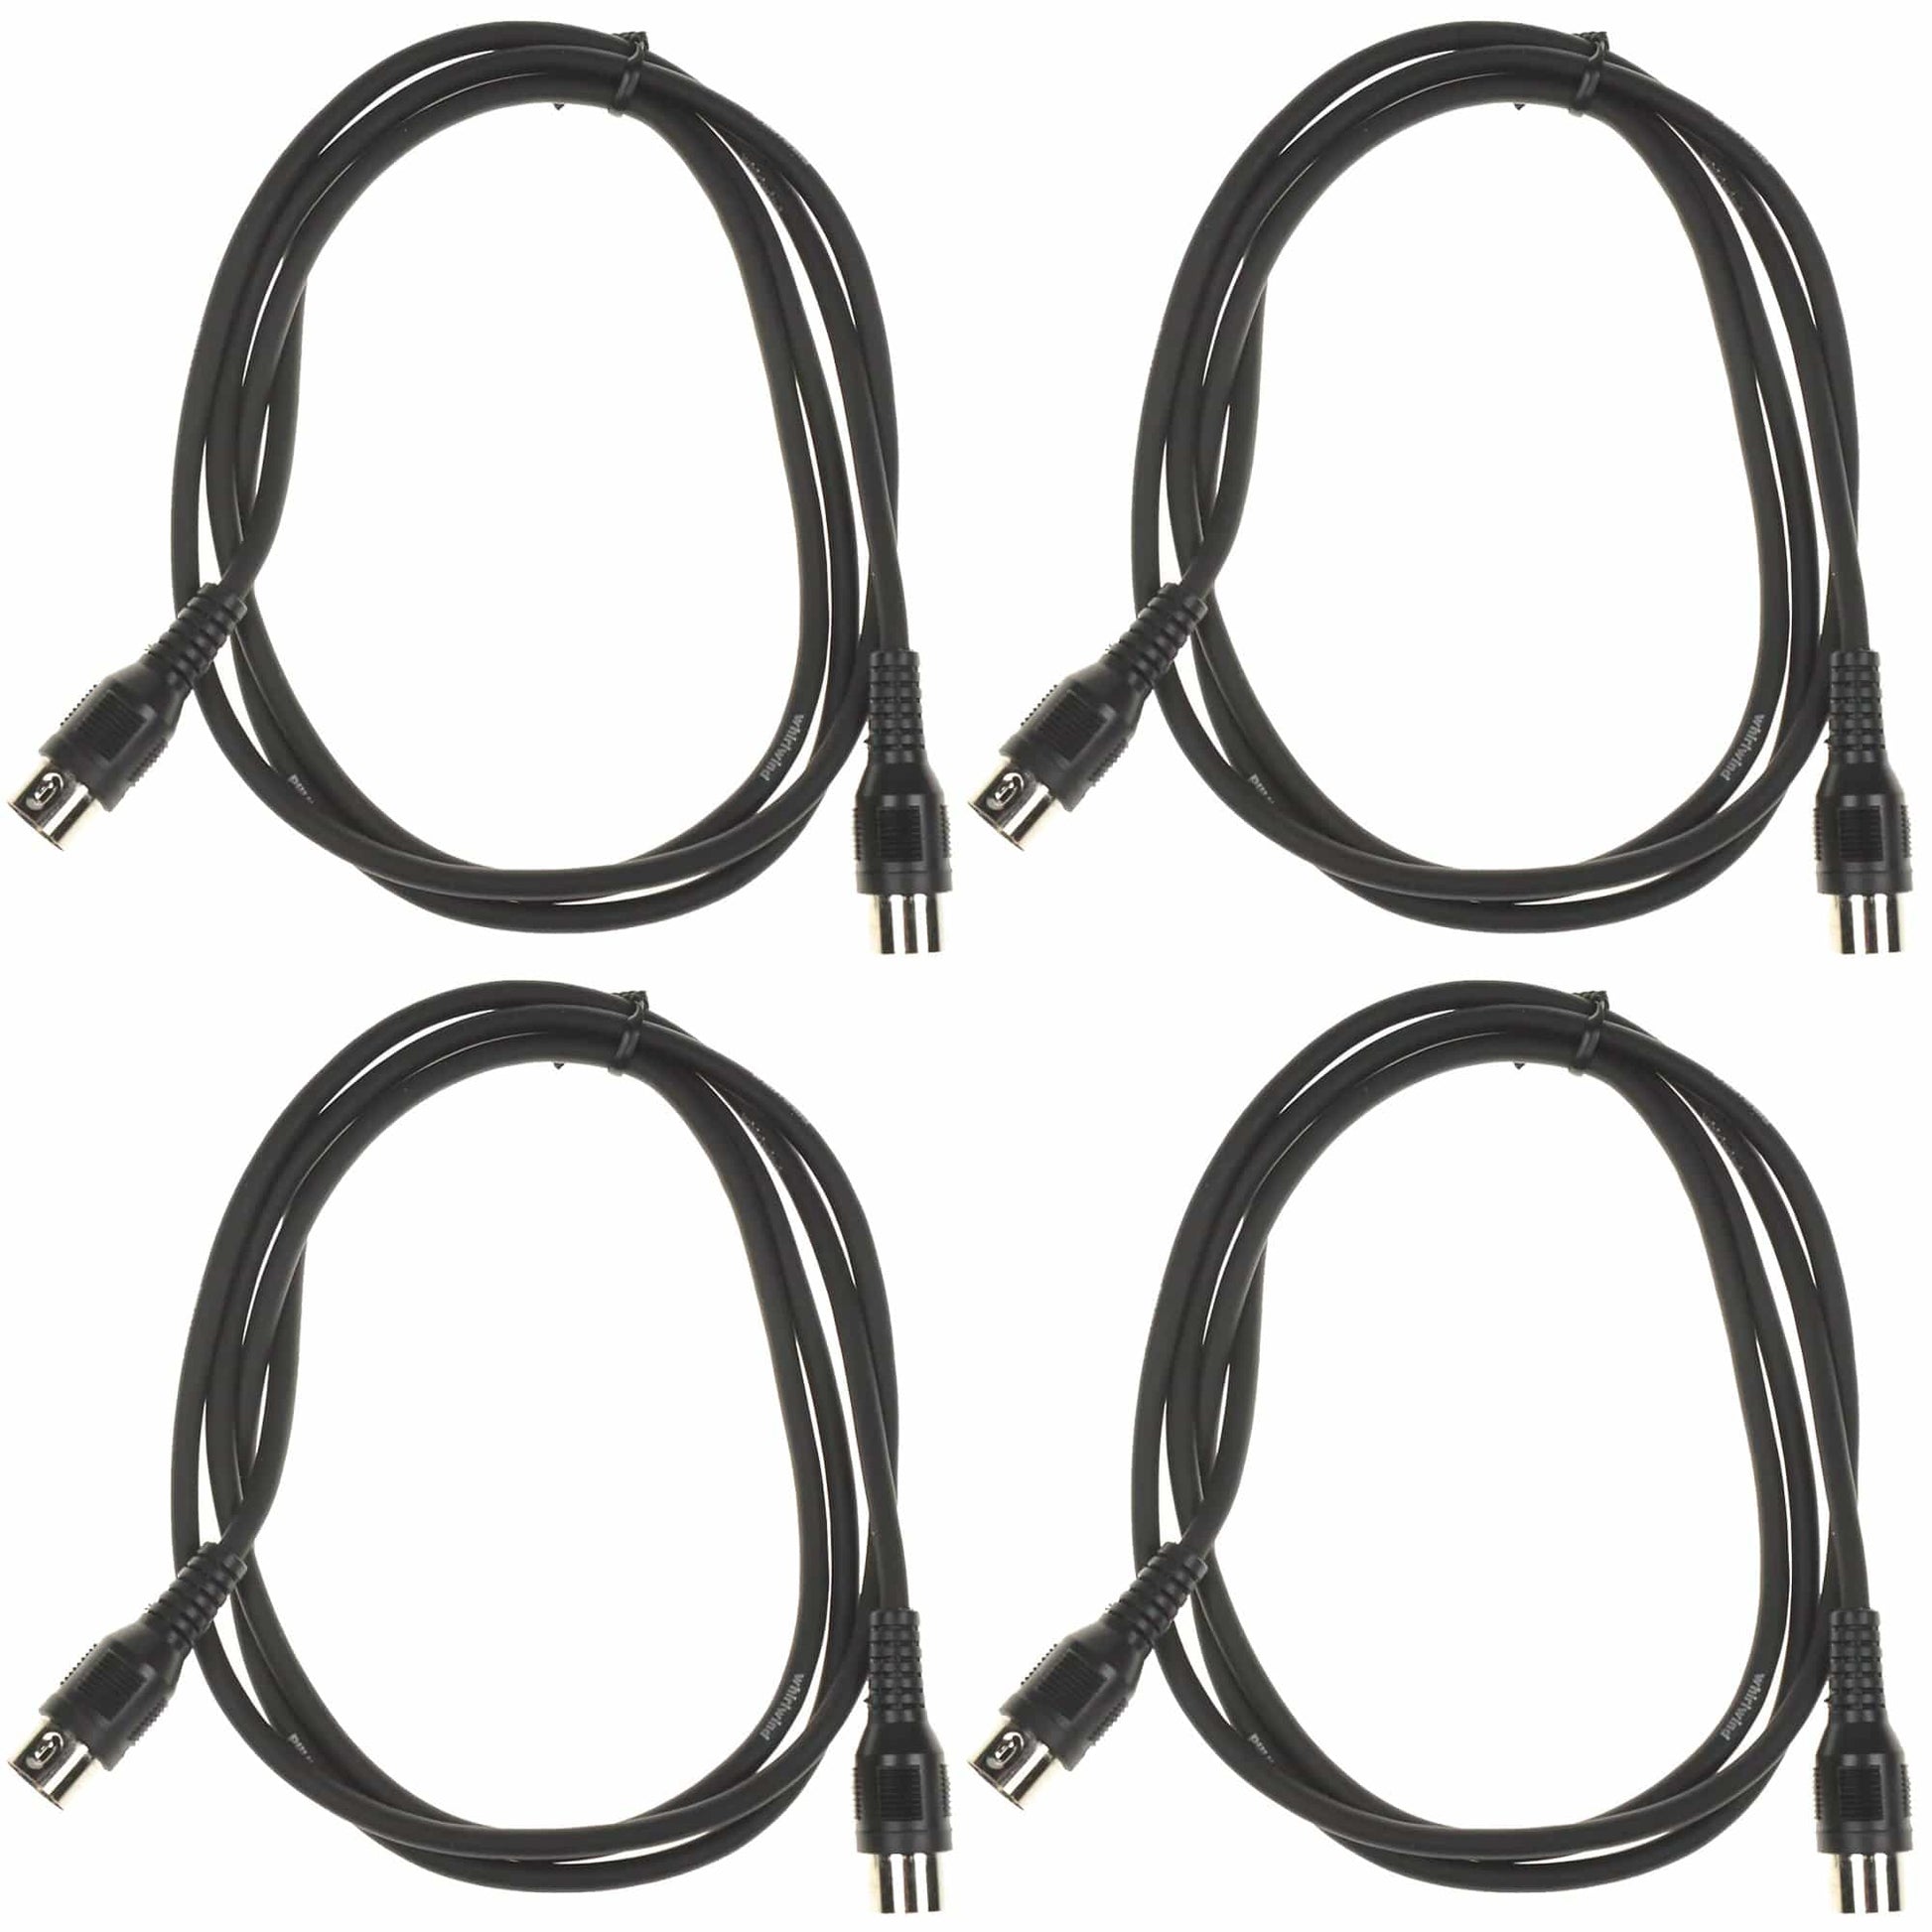 Whirlwind MIDI Cable 5-Pin 5' Black 4 Pack Bundle Accessories / Cables